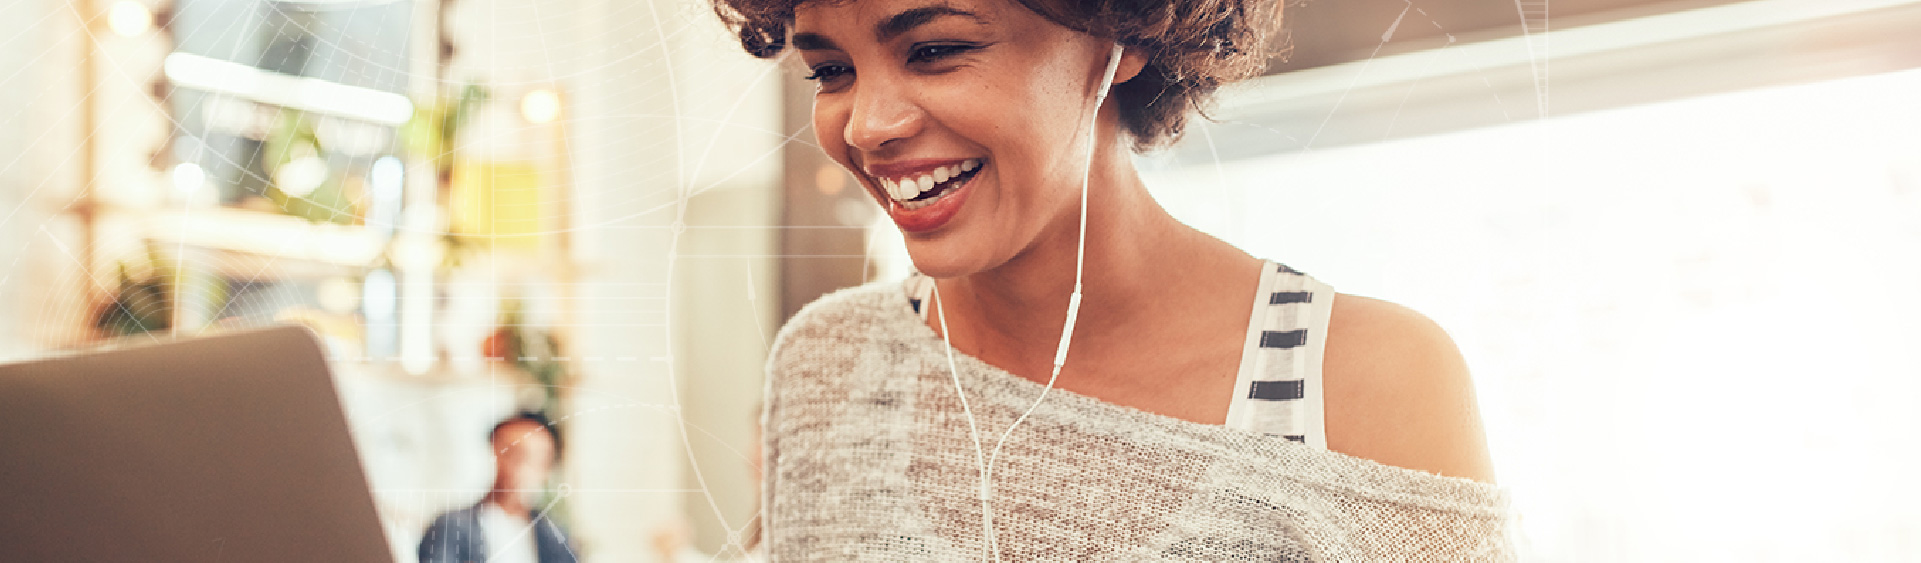 Young female college student smiling with ear buds in her ears.